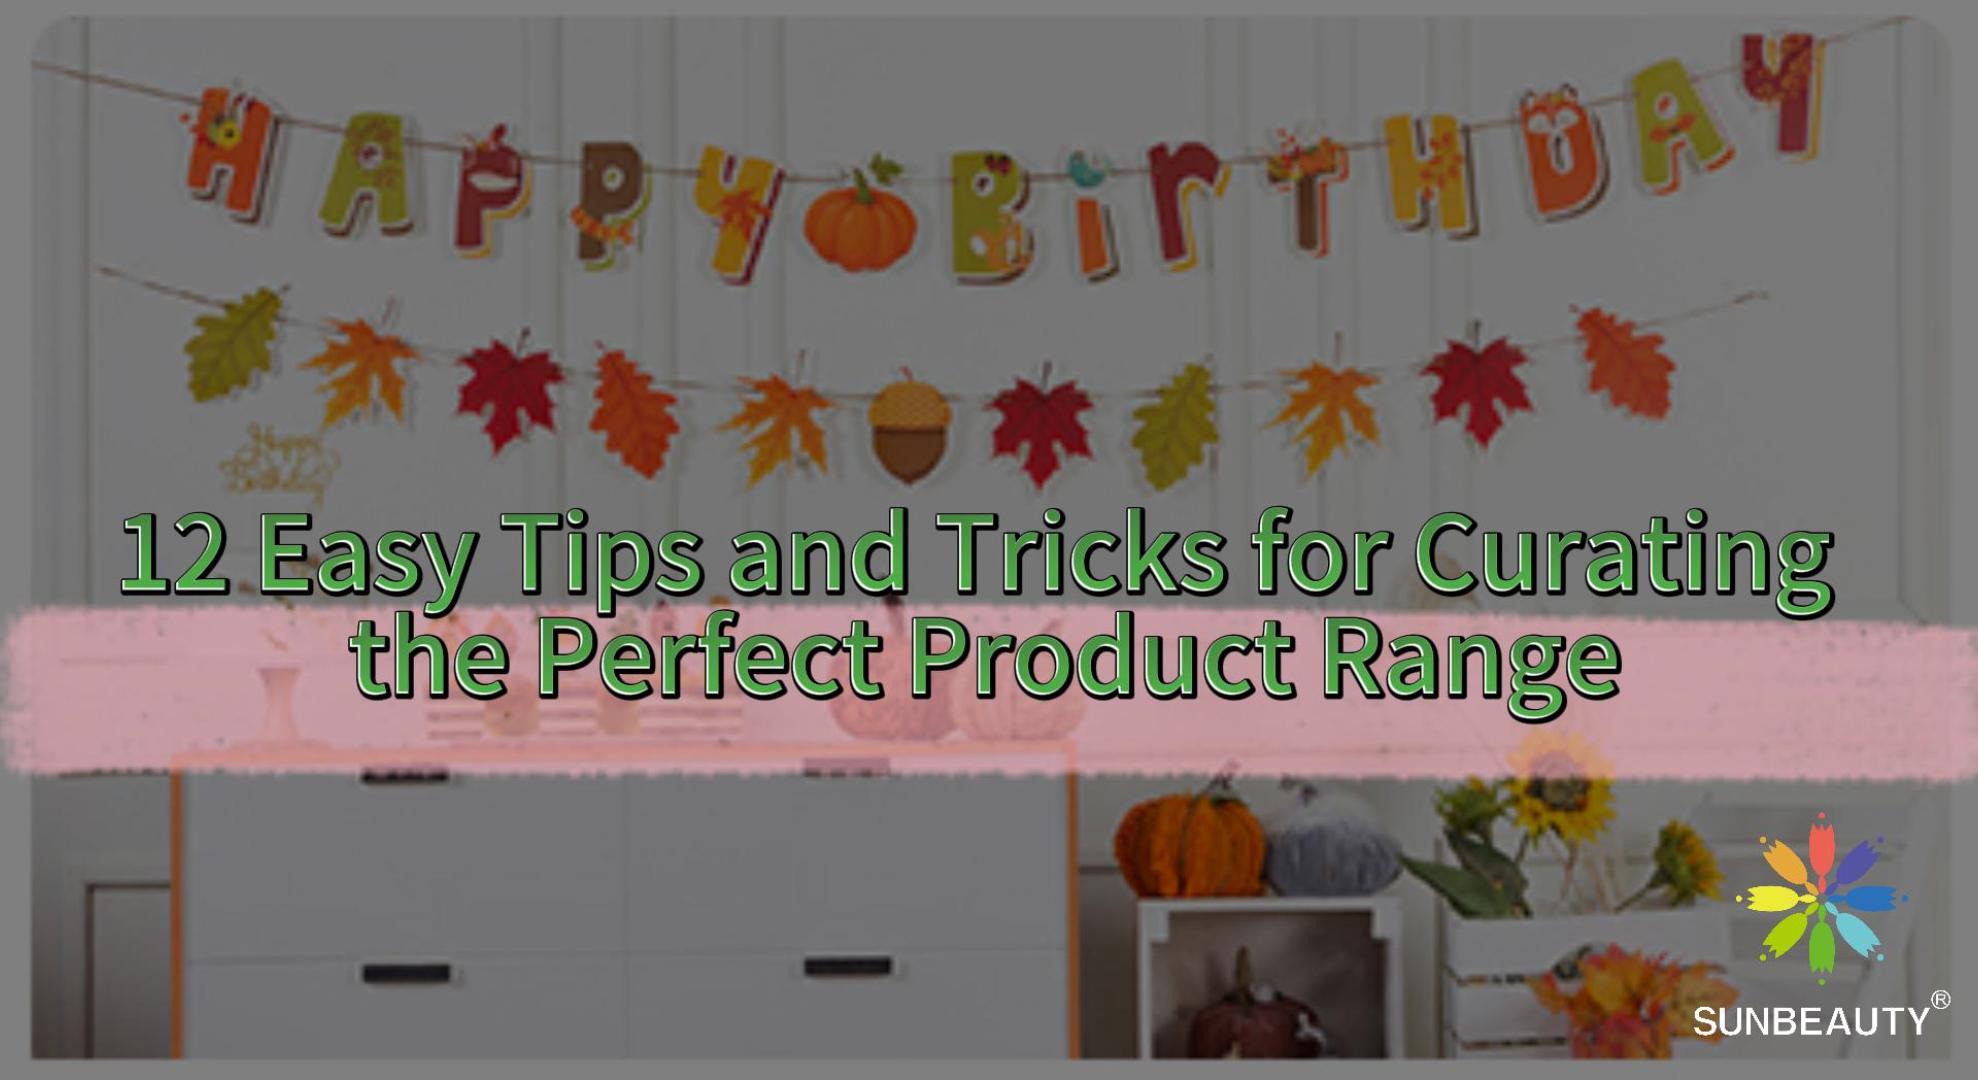 12 Easy Tips and Tricks for Curating the Perfect Product Range